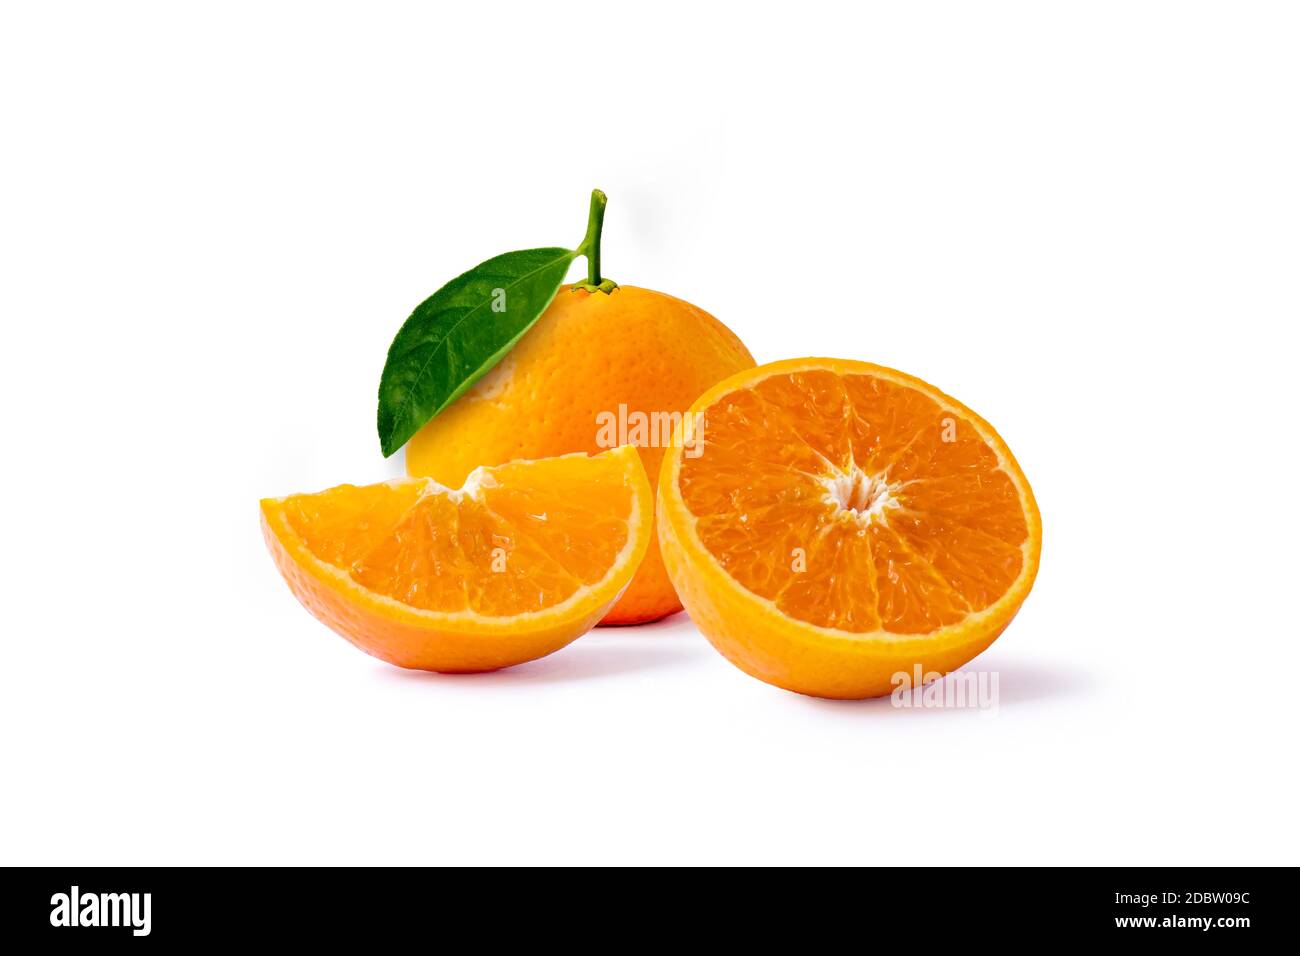 Oranges and oranges slices isolated on a white background. Stock Photo